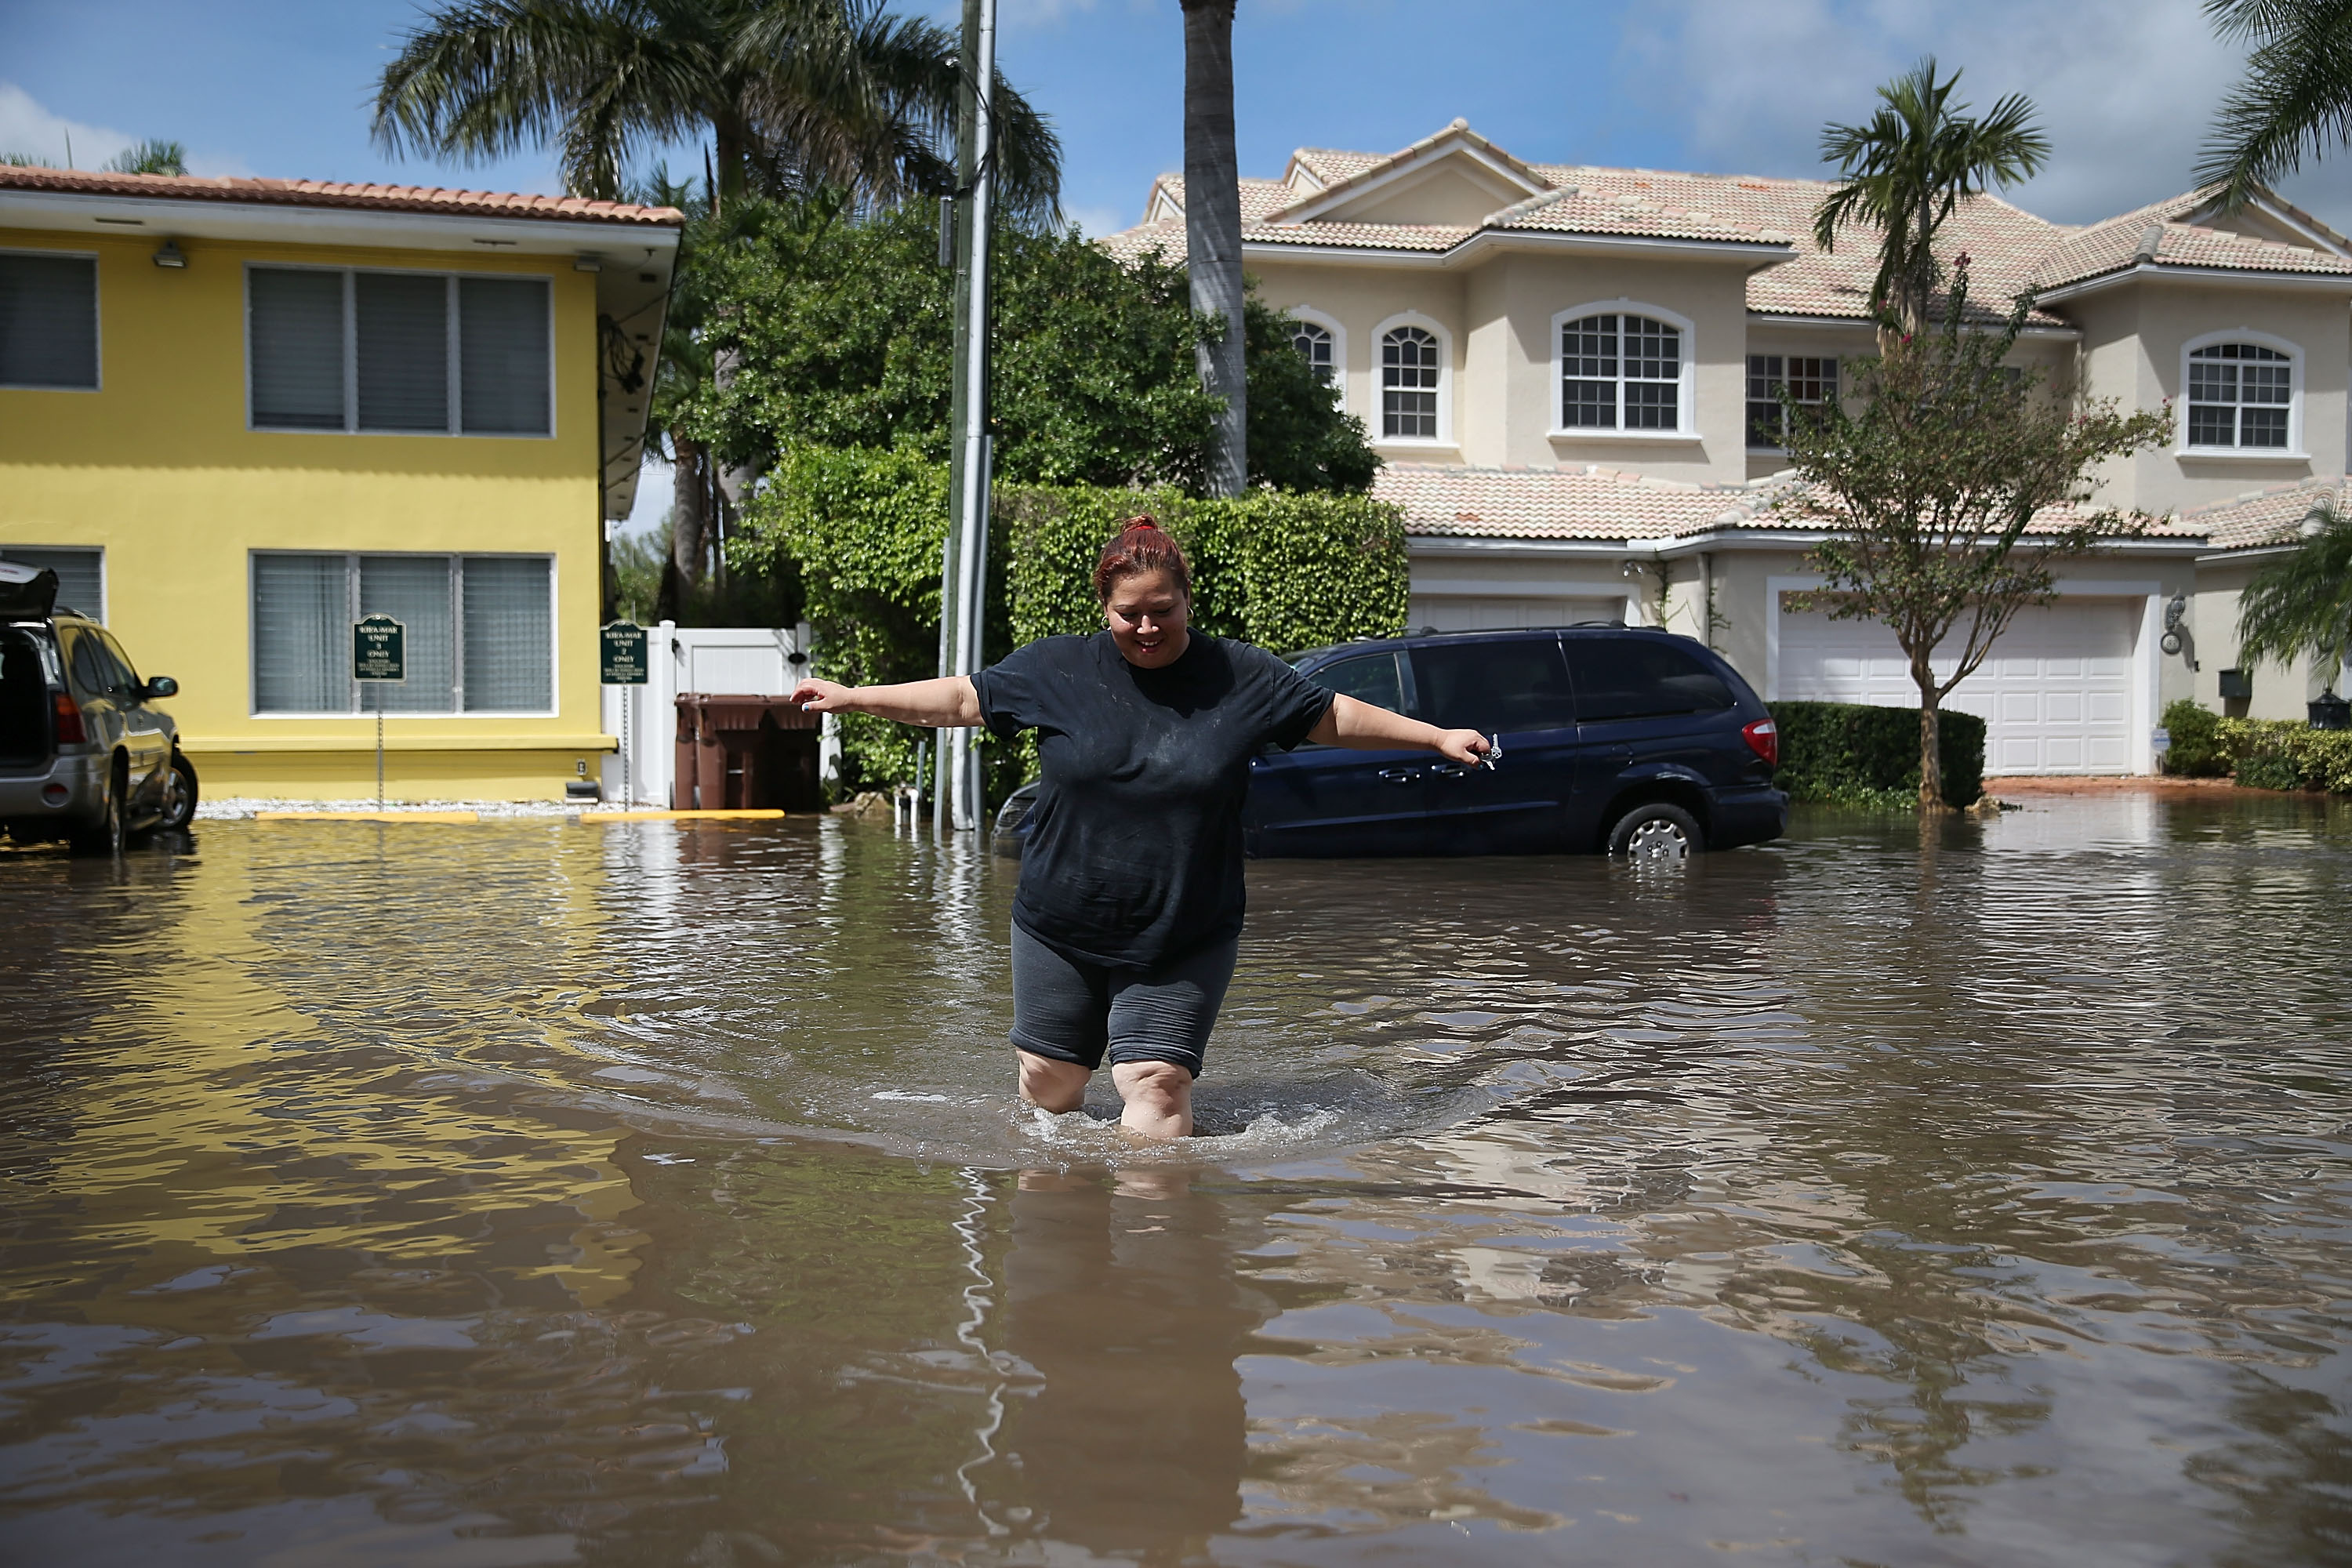 Sea level rise will disproportionately hit U.S. this century, NOAA